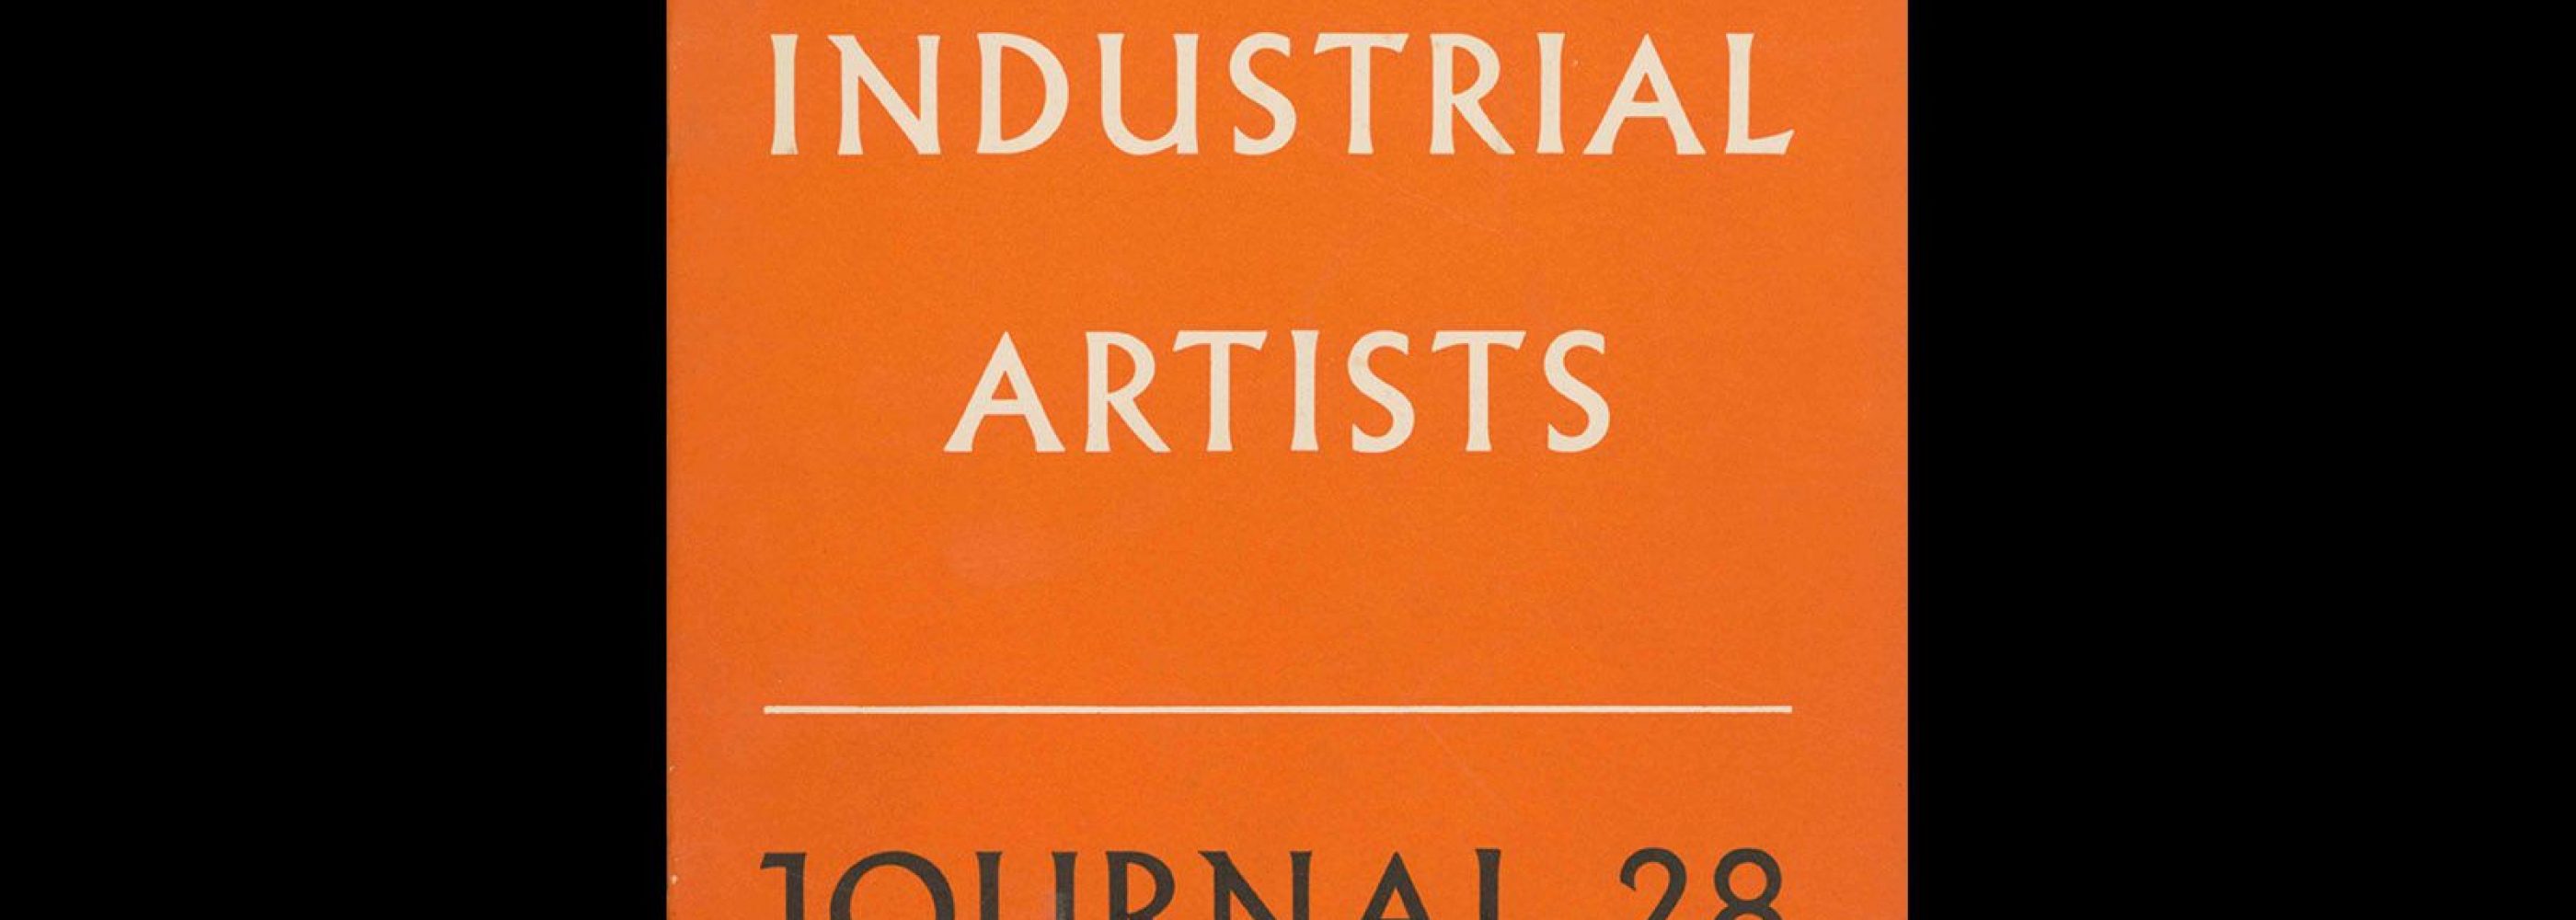 Society of Industrial Artists, 28, August 1952